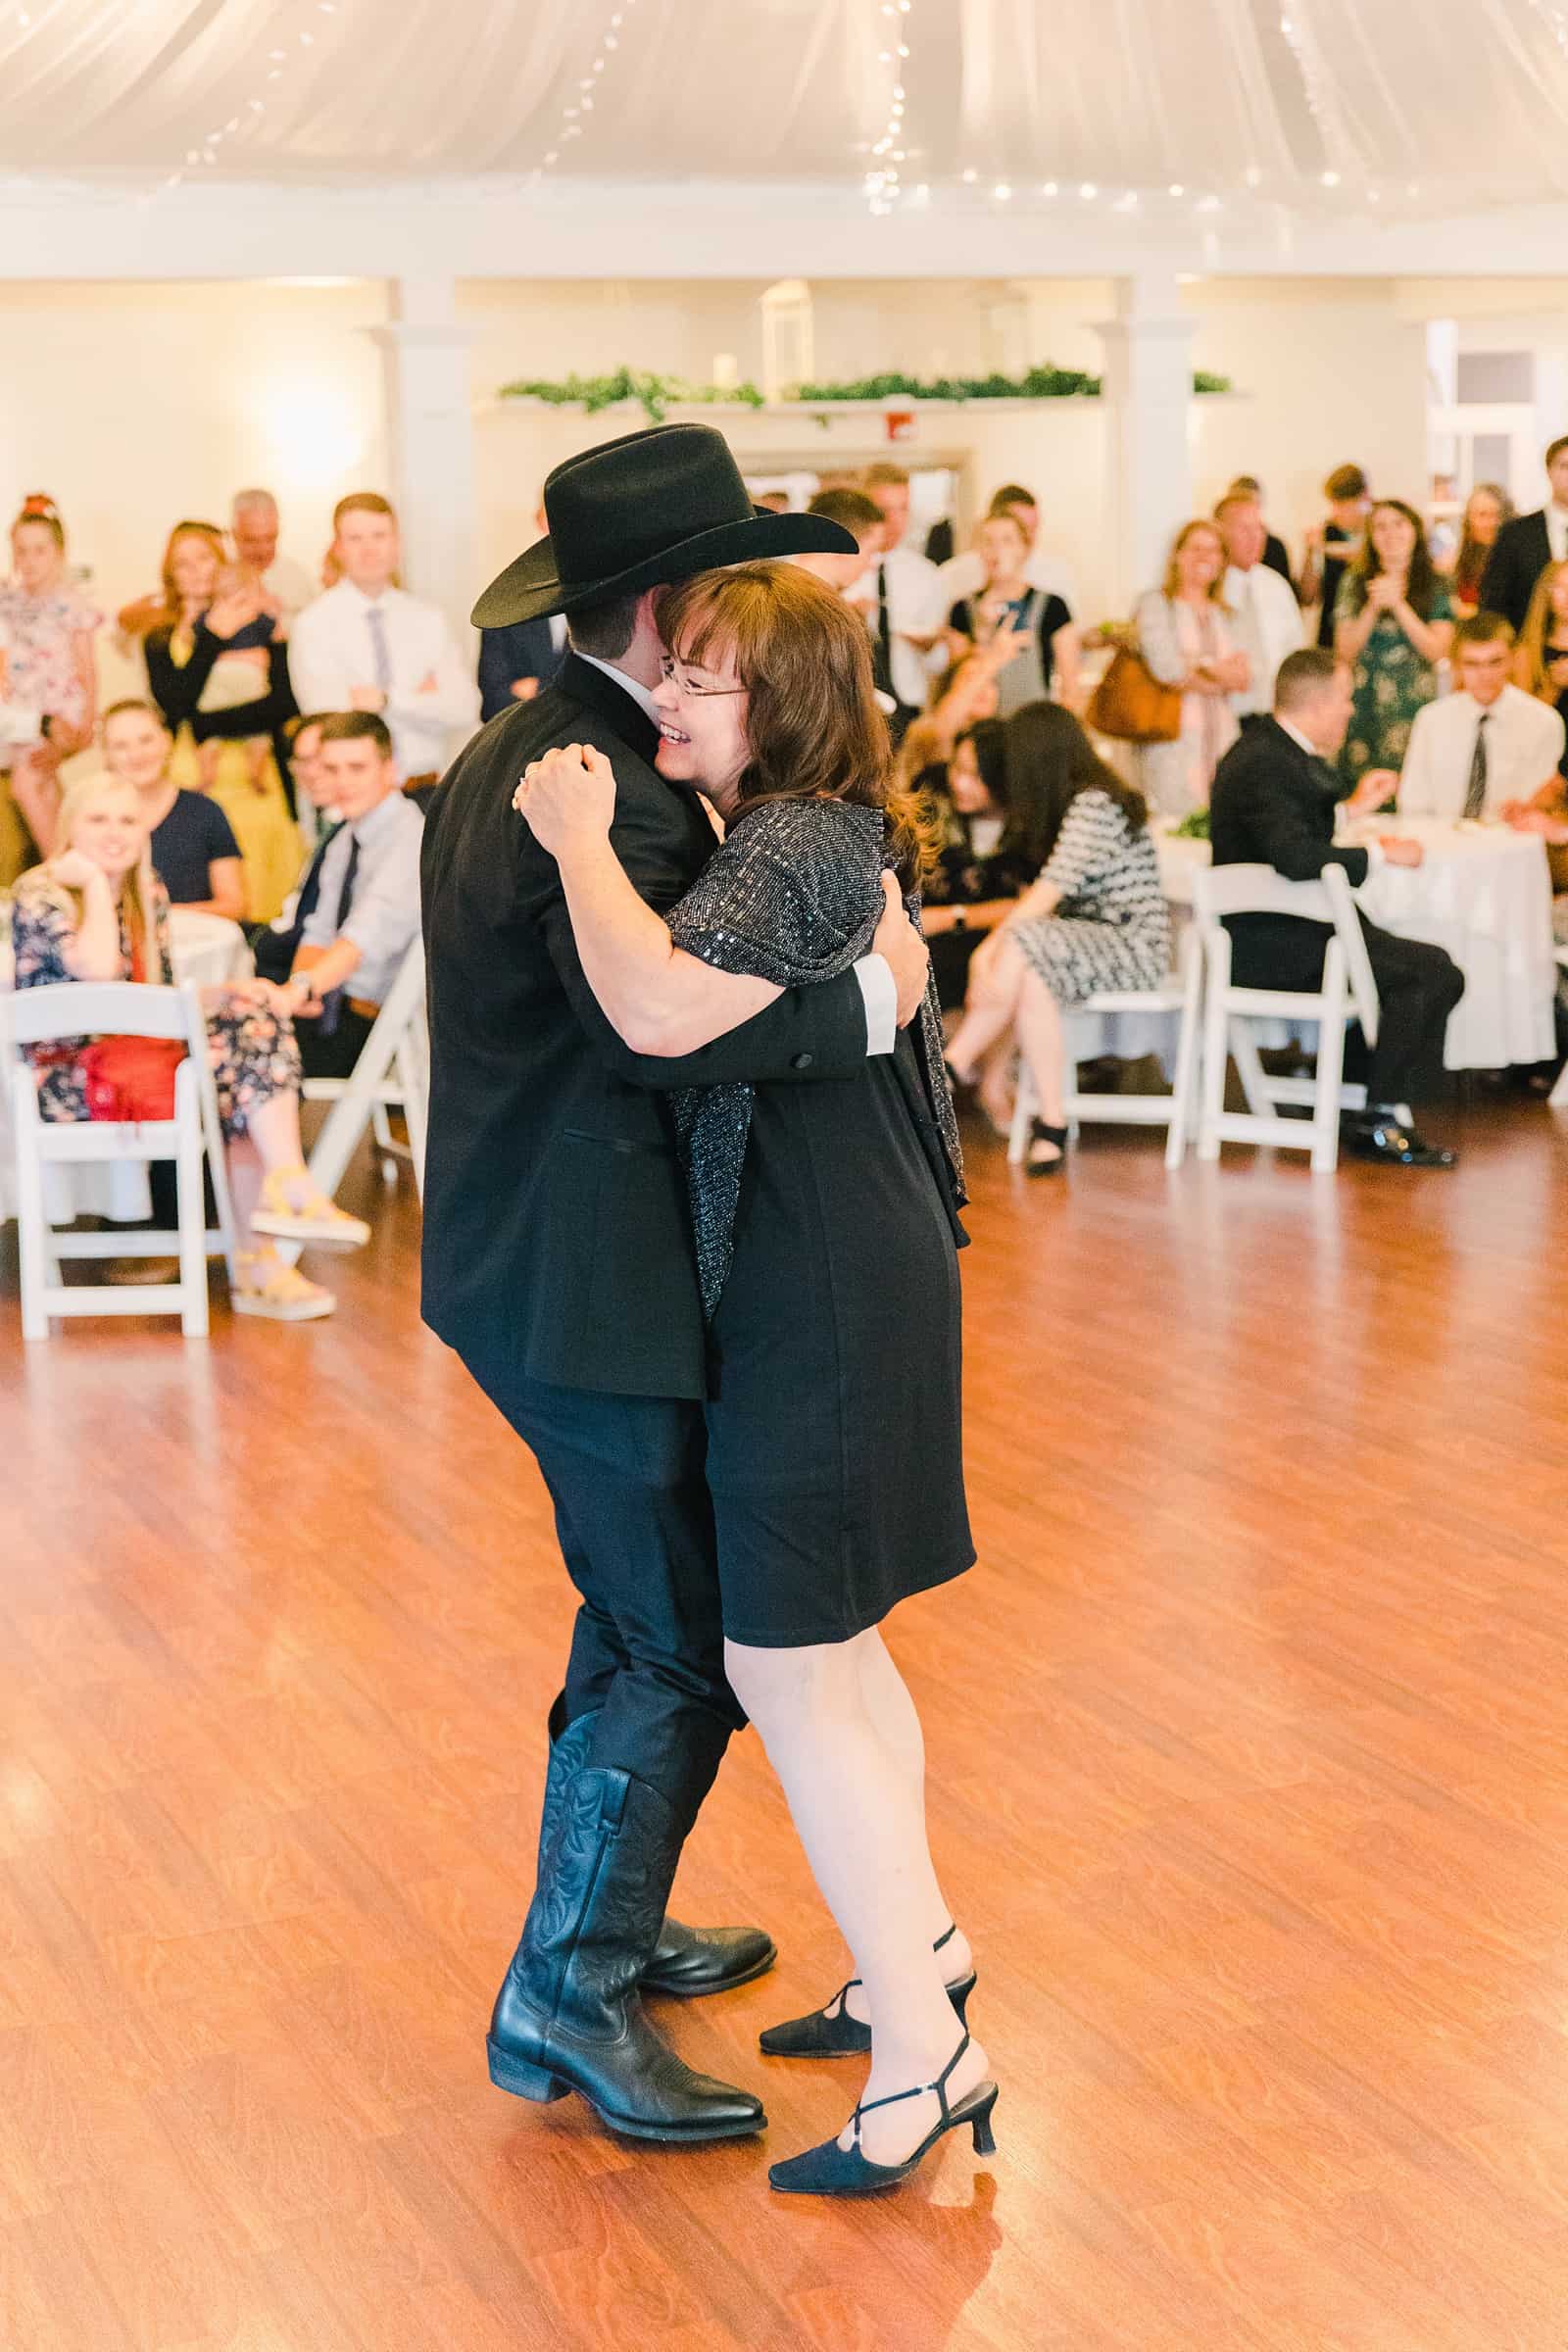 Clarion Gardens Payson Utah Wedding, groom wears cowboy hat and dances with mother of the groom